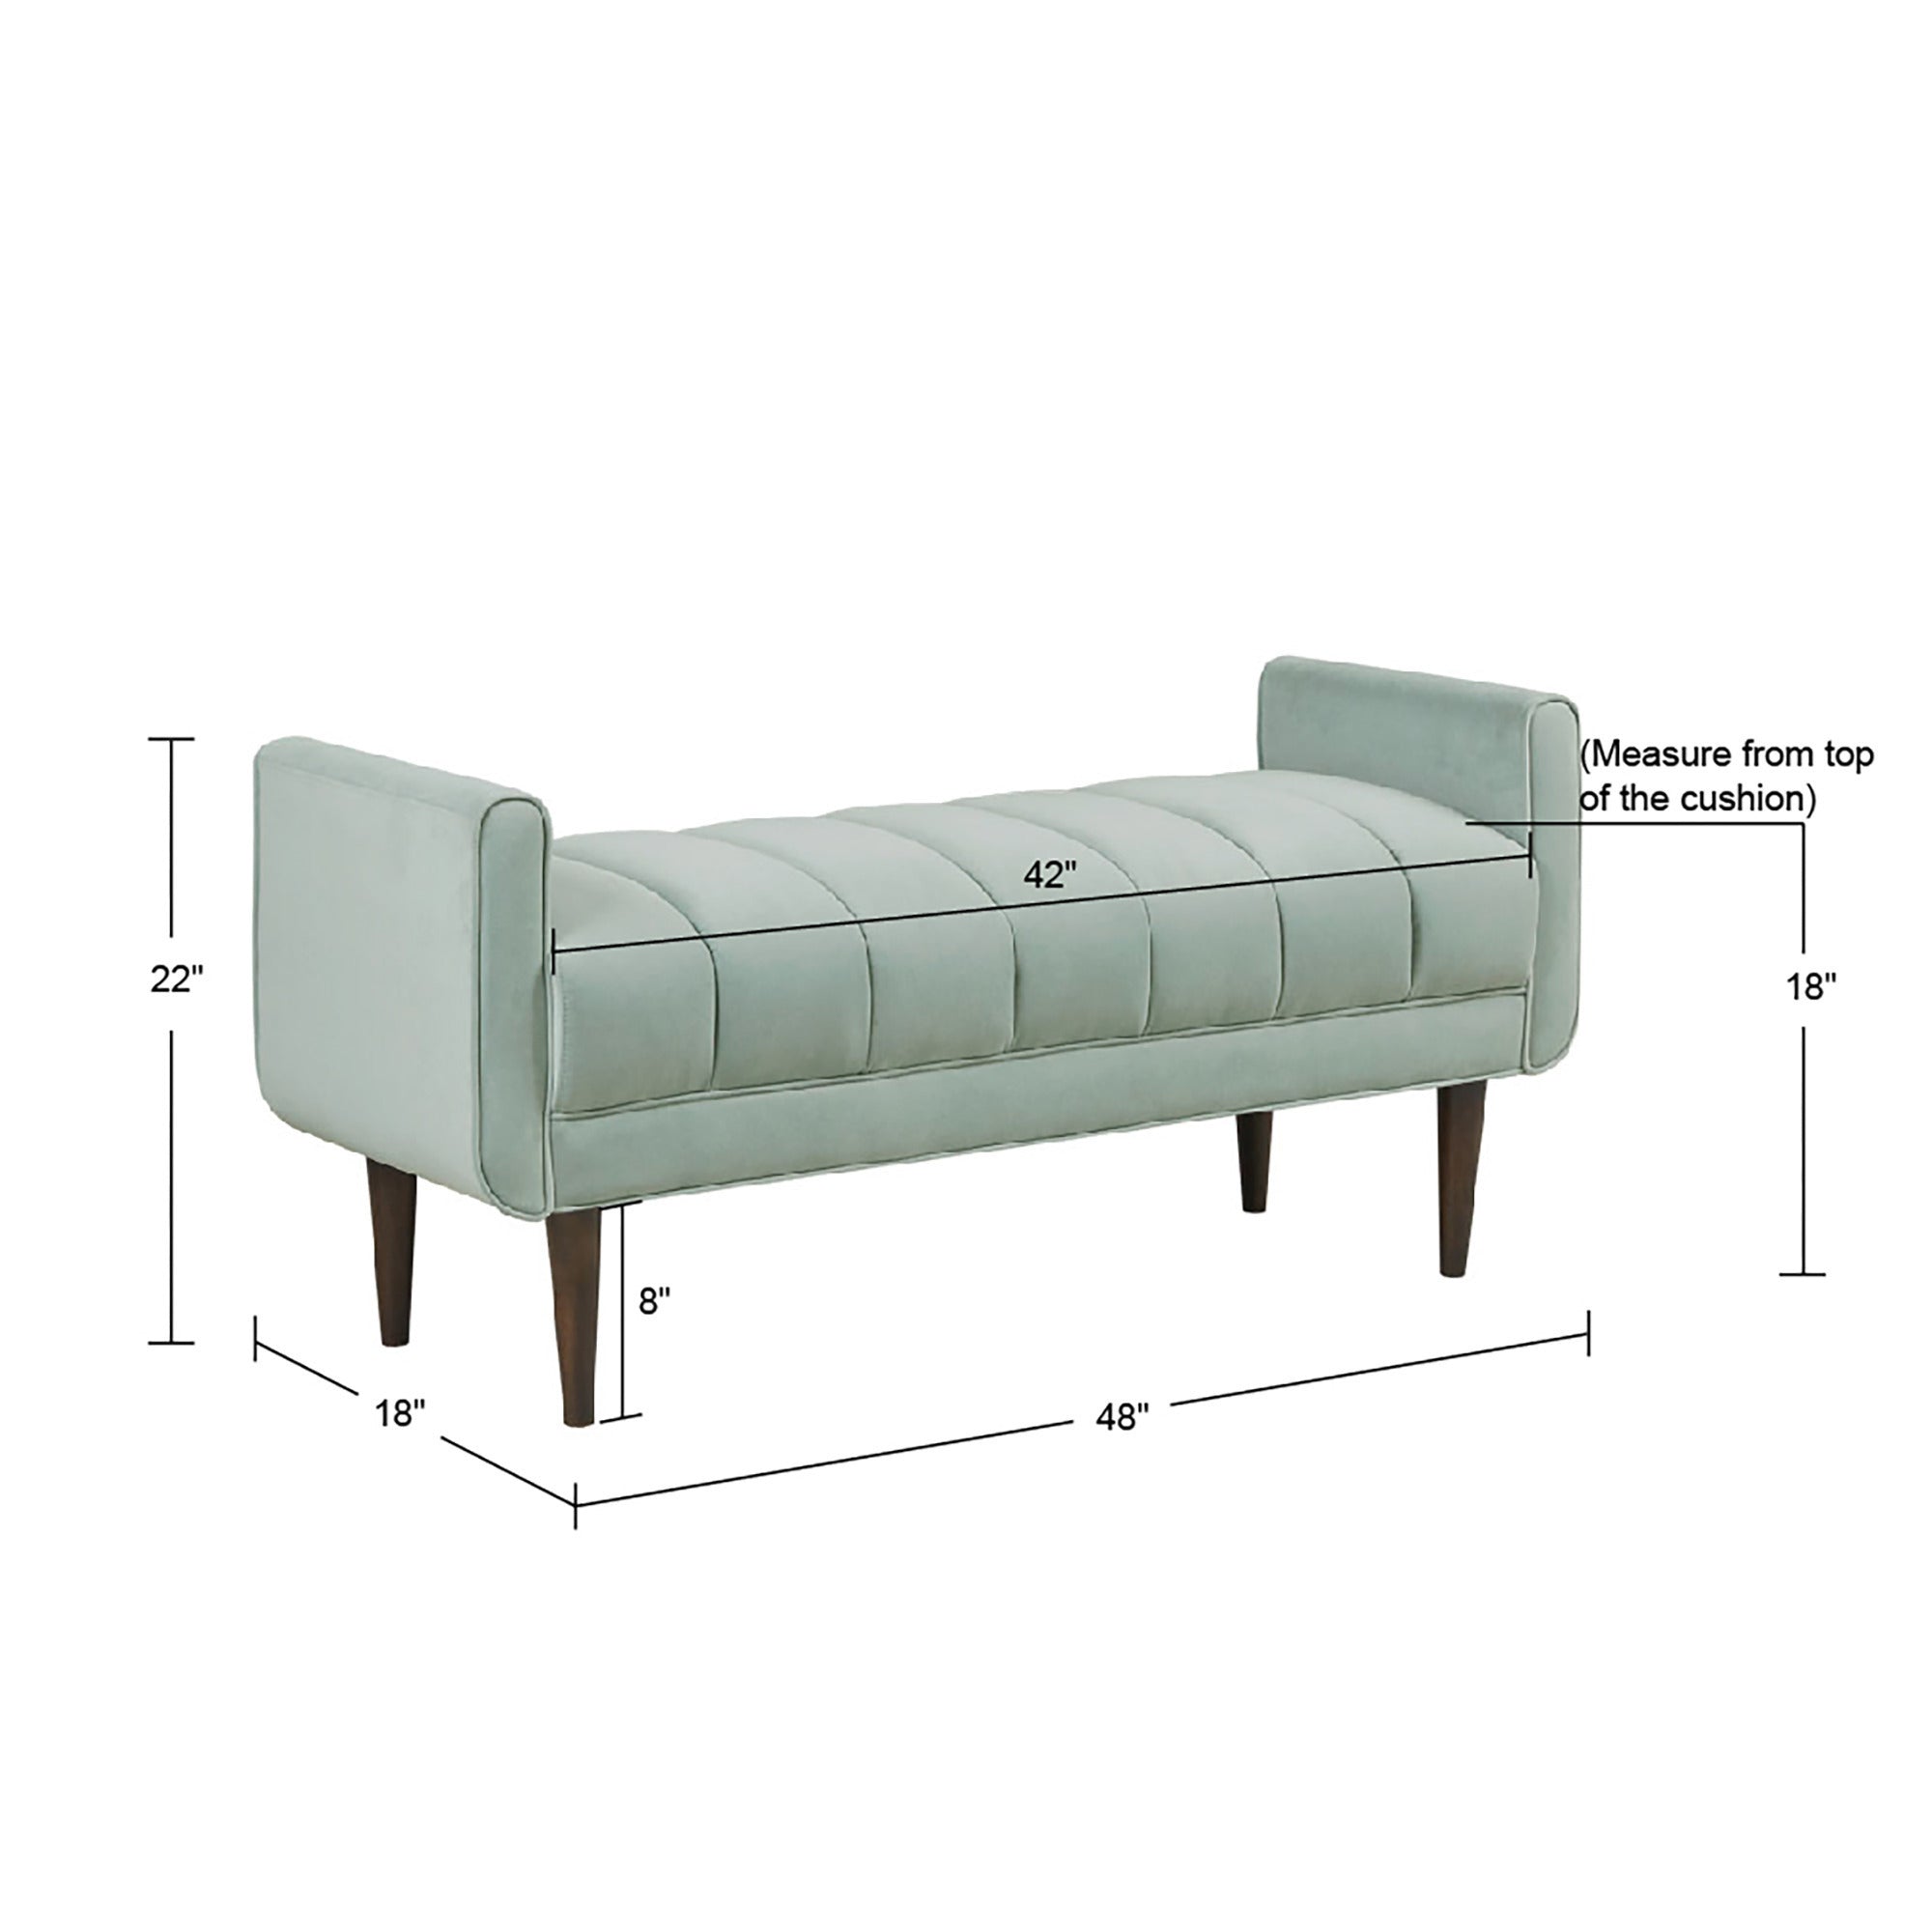 Upholstered Modern Accent Bench